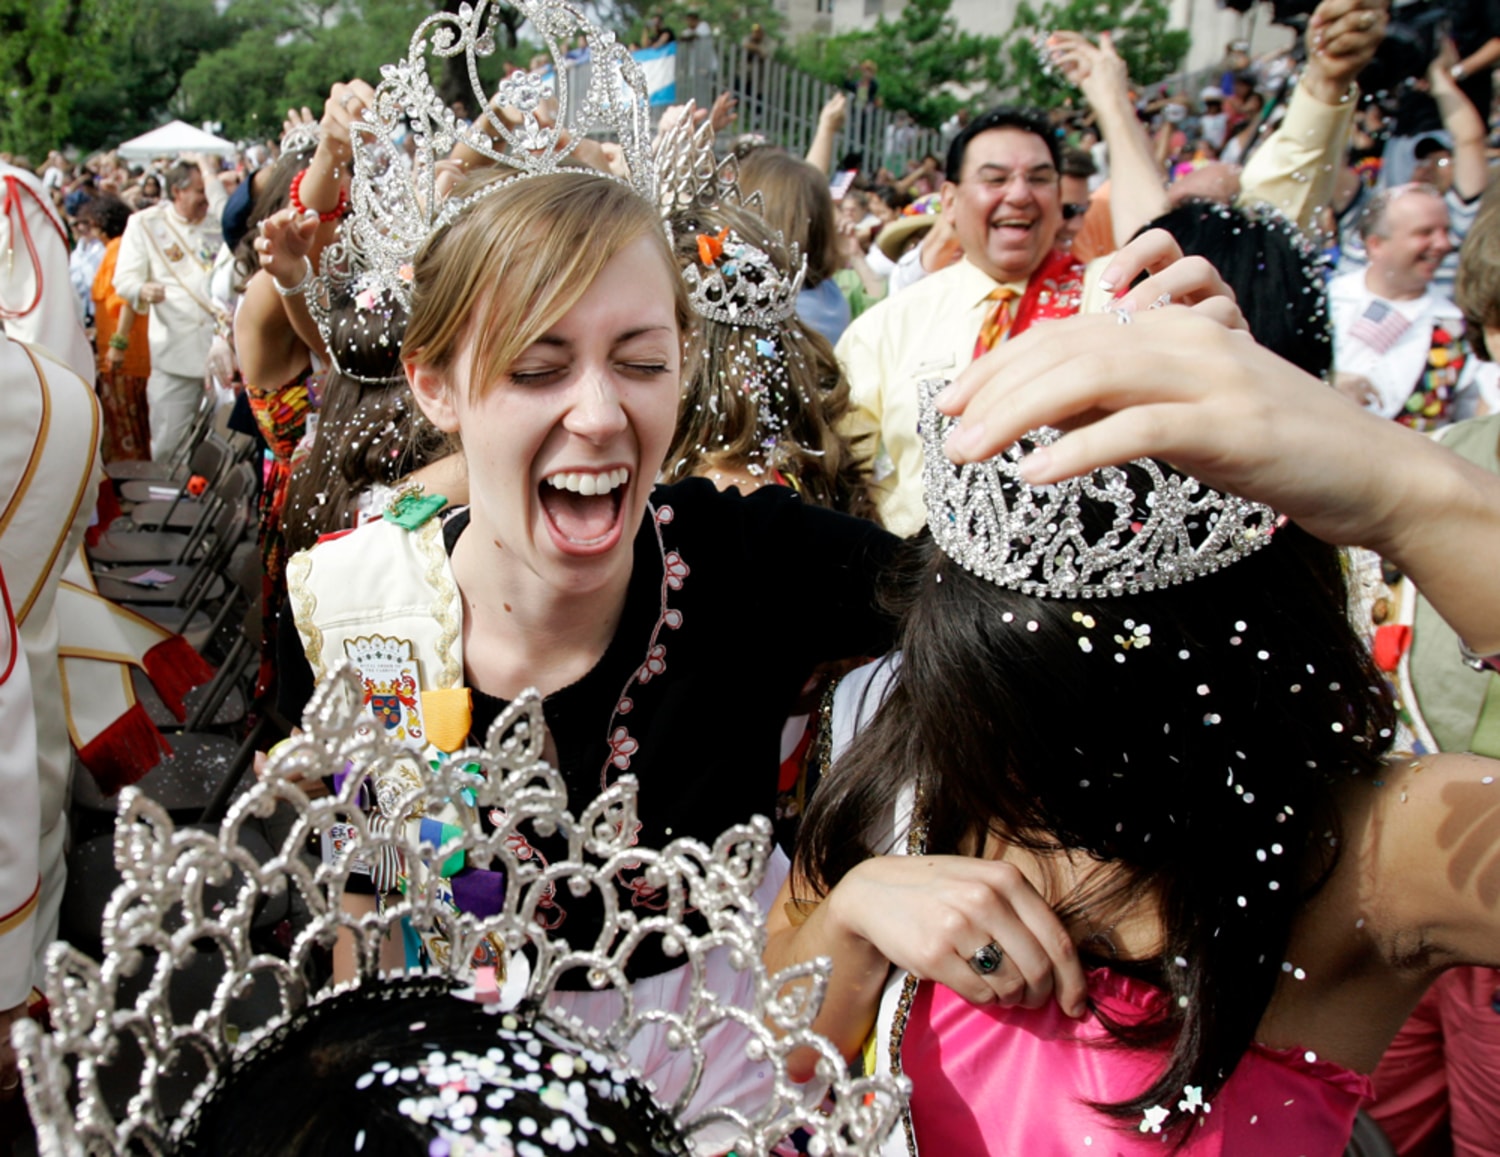 Fiesta San Antonio: Everything You Need To Know About The 'Party